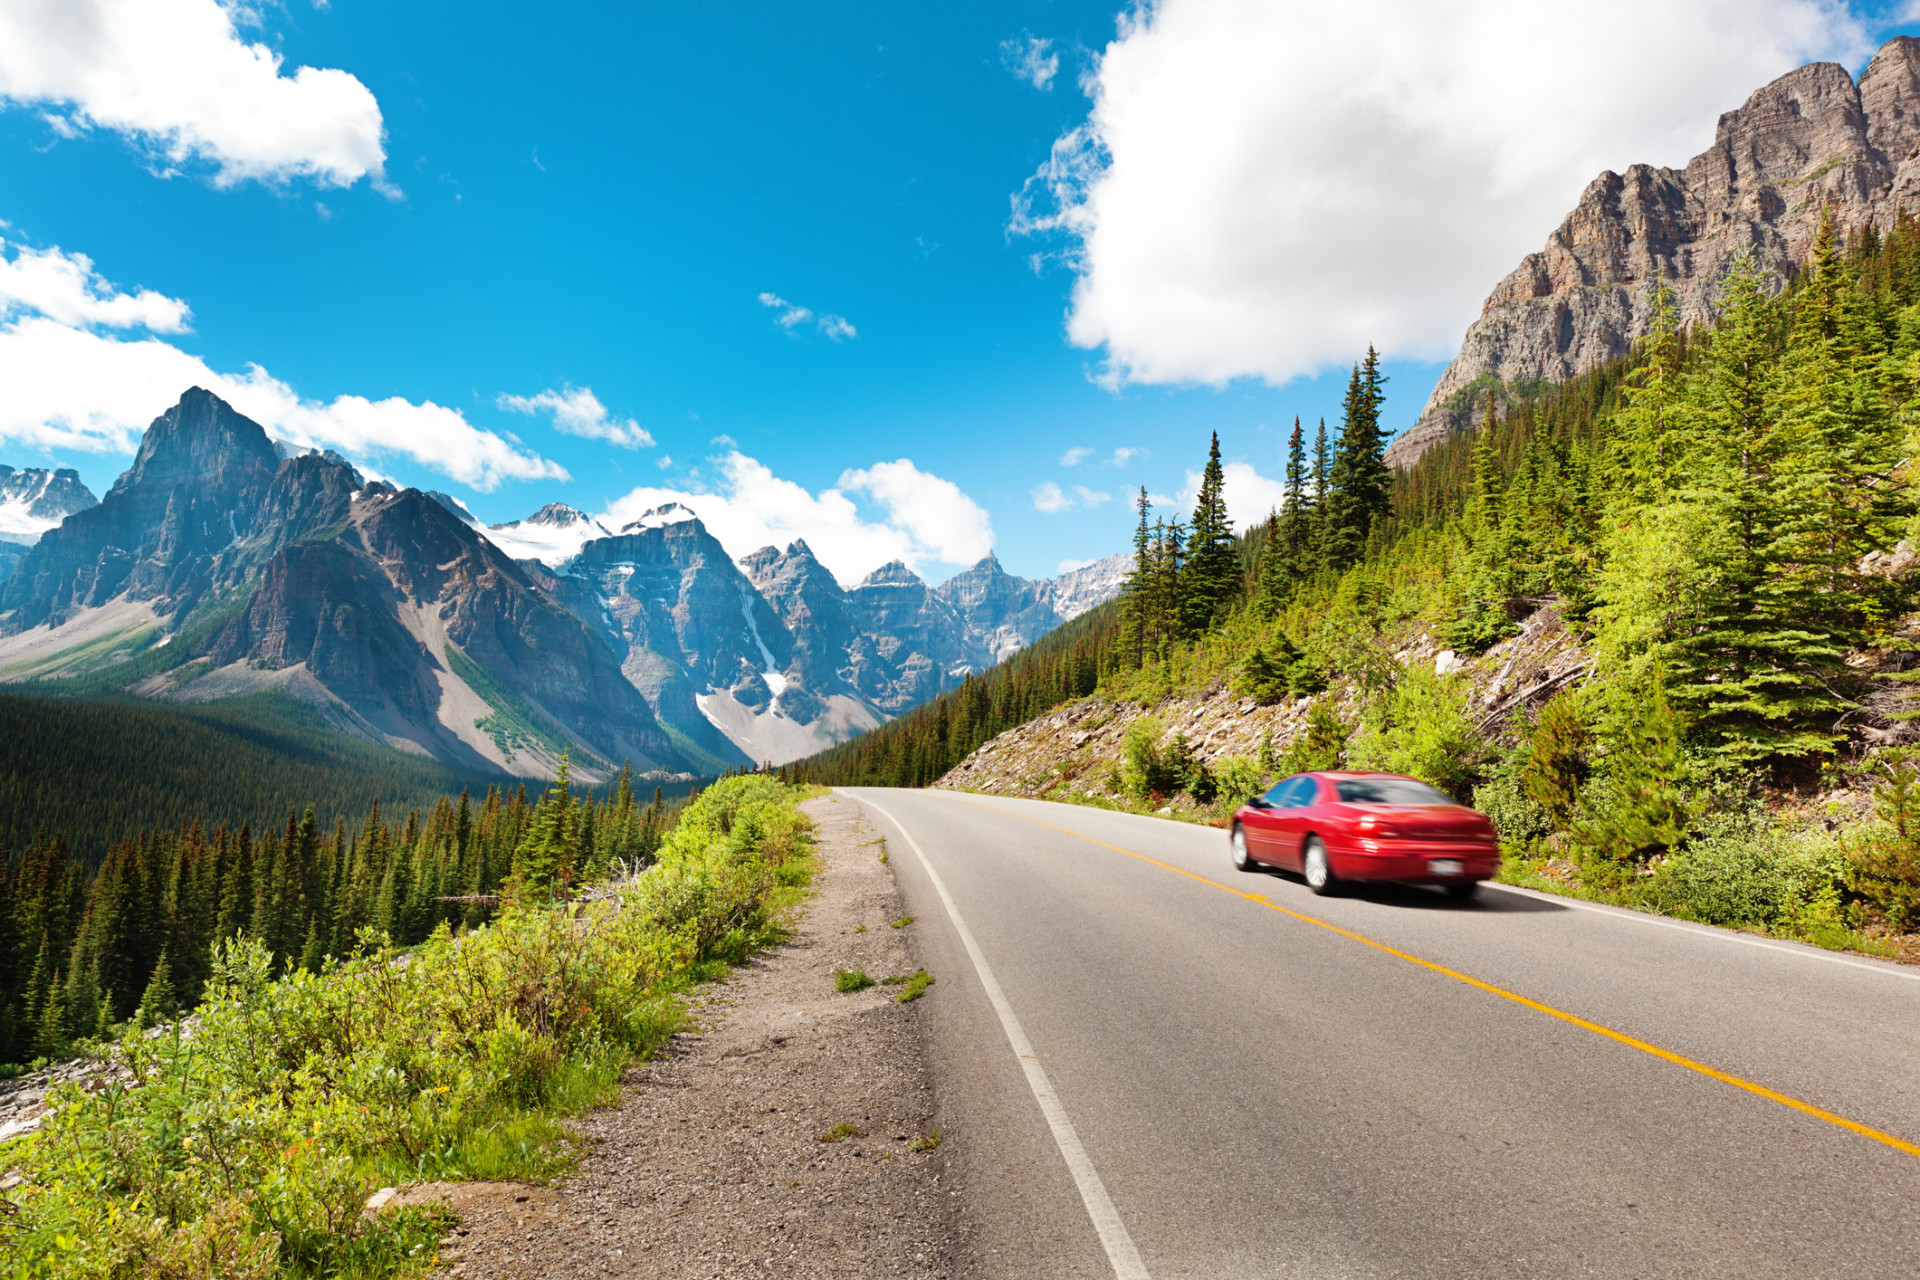 For about 140 km more, you can bypass Calgary and drive through the beautiful little town of Banff. <p>You may also like:<a href="https://www.starsinsider.com/n/444695?utm_source=msn.com&utm_medium=display&utm_campaign=referral_description&utm_content=384585v6en-us"> Busted! These celebrities lied about their age</a></p>